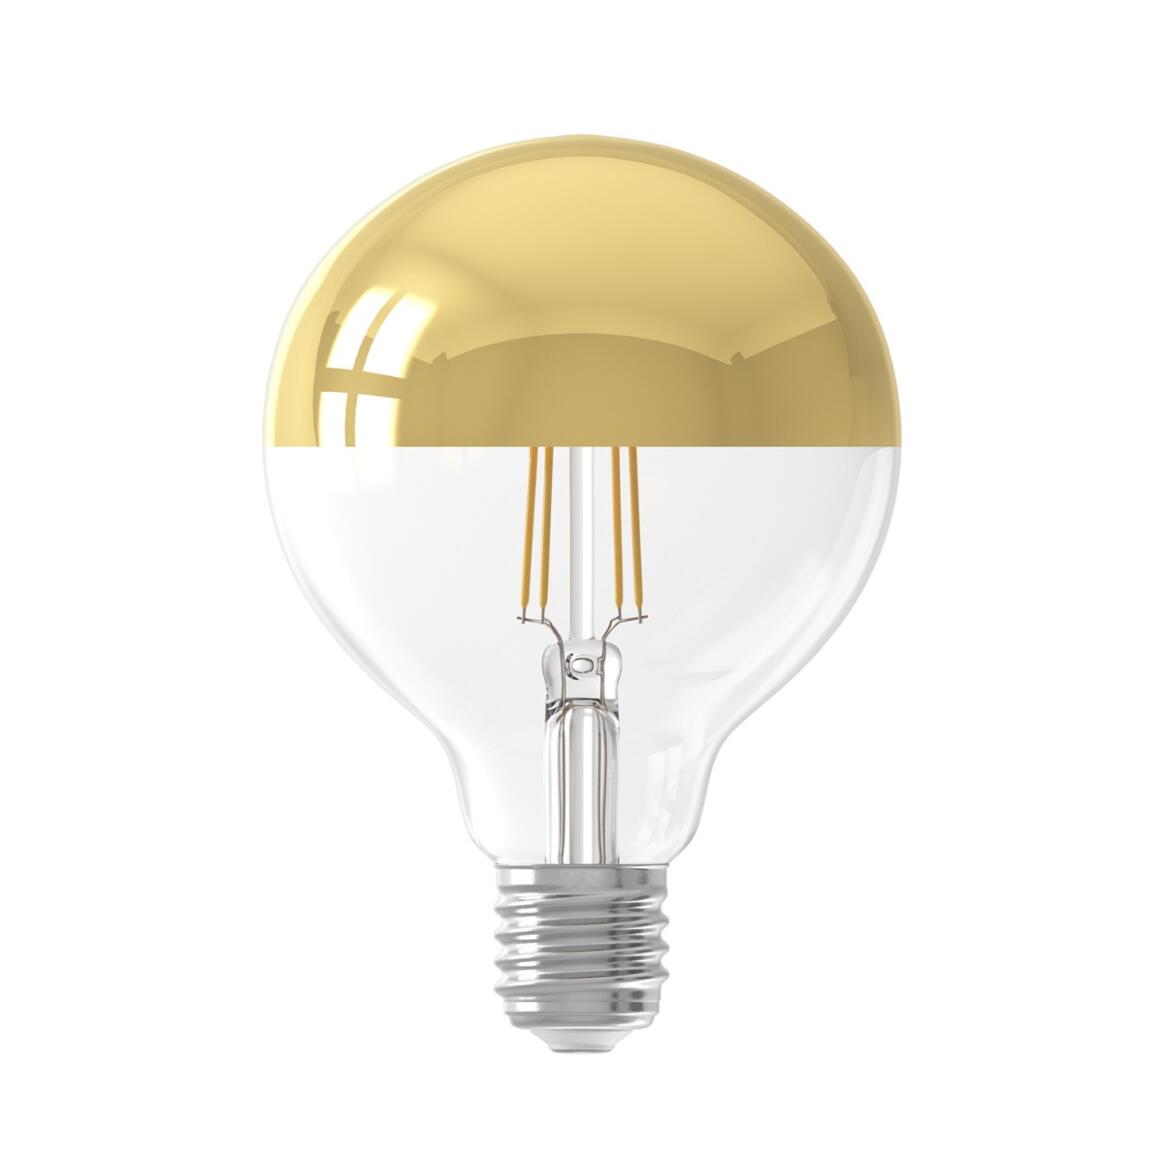 LED Filament Mirror Top Light Bulb Gold/Chrome Dimmable E27 4W 2300k 280lm 9.5cm main product image